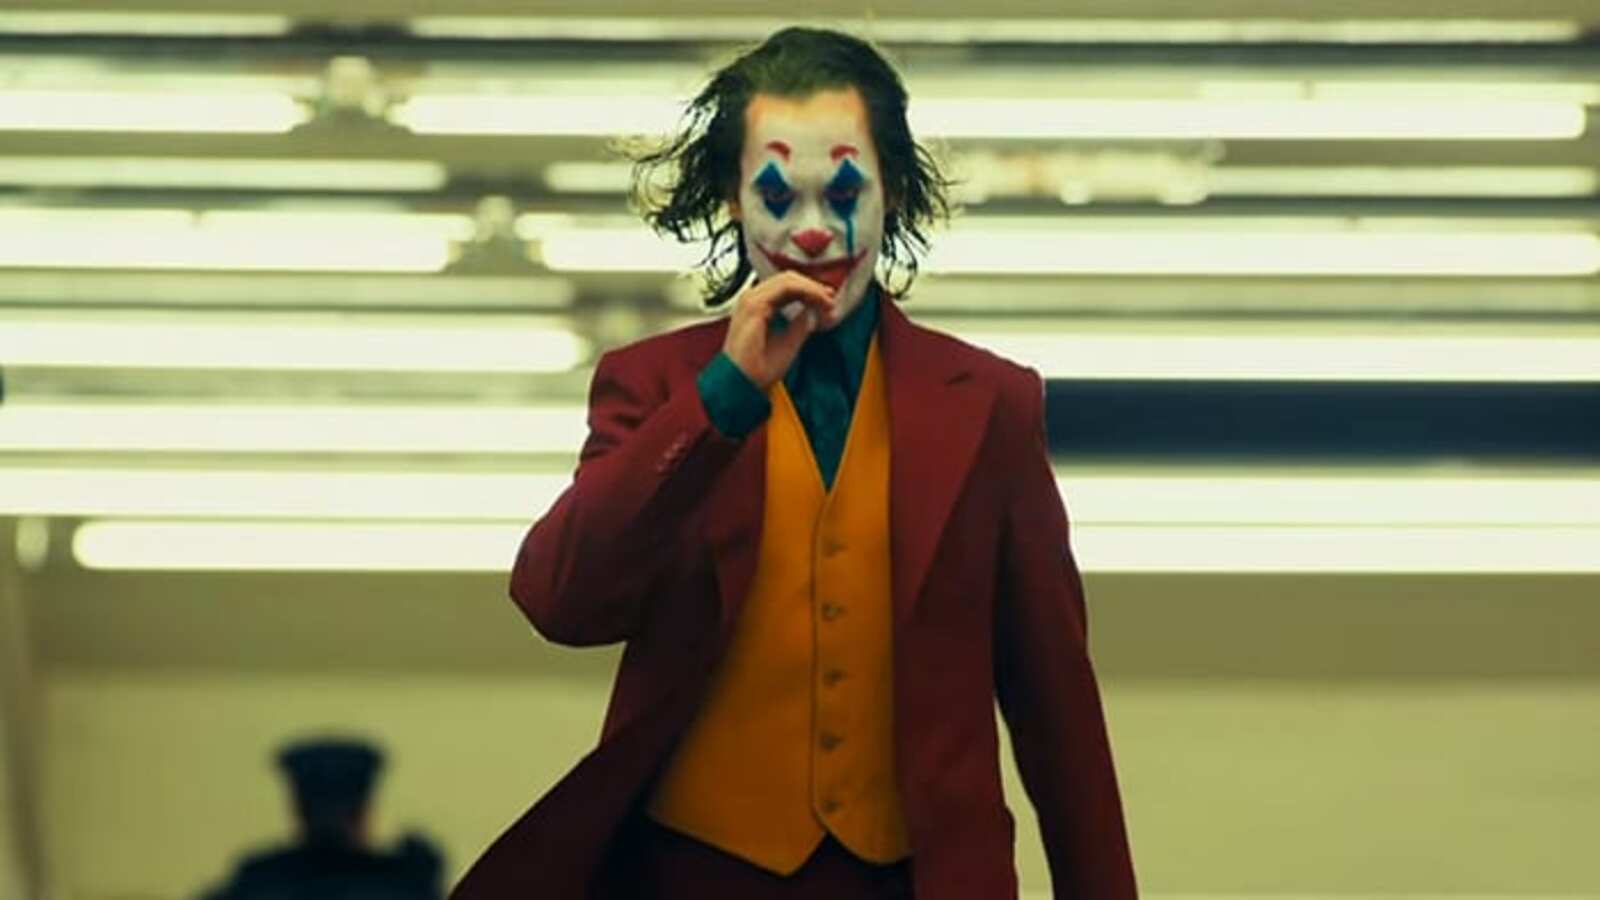 Joker 2, the new photos from the film anticipate a clash between Arthur Fleck and a famous comic book villain?